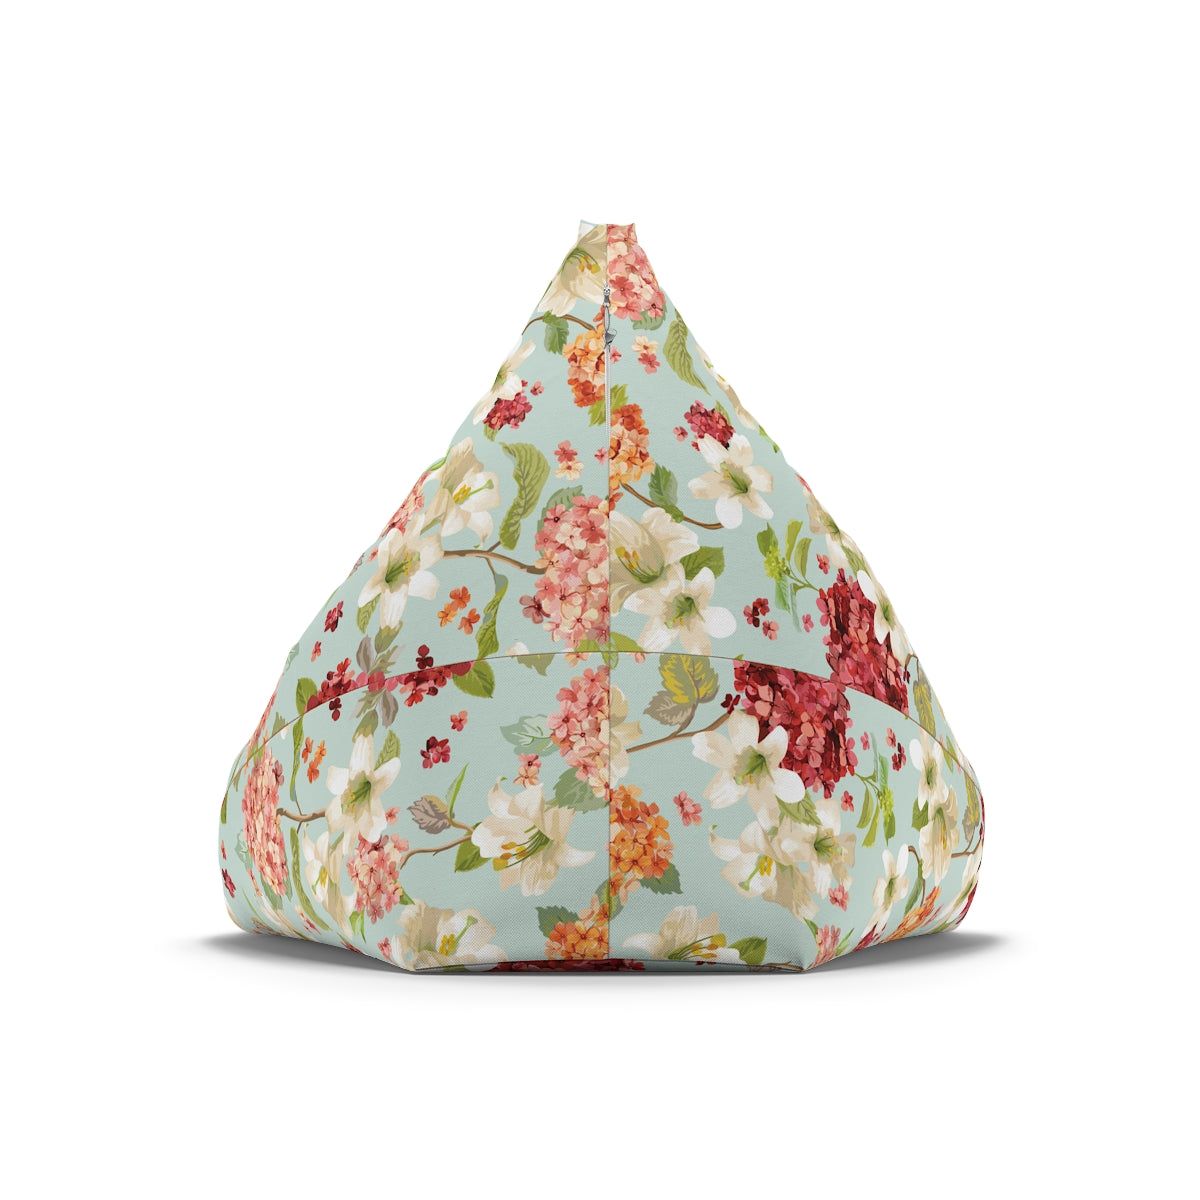 Autumn Hortensia and Lily Flowers Bean Bag Chair Cover